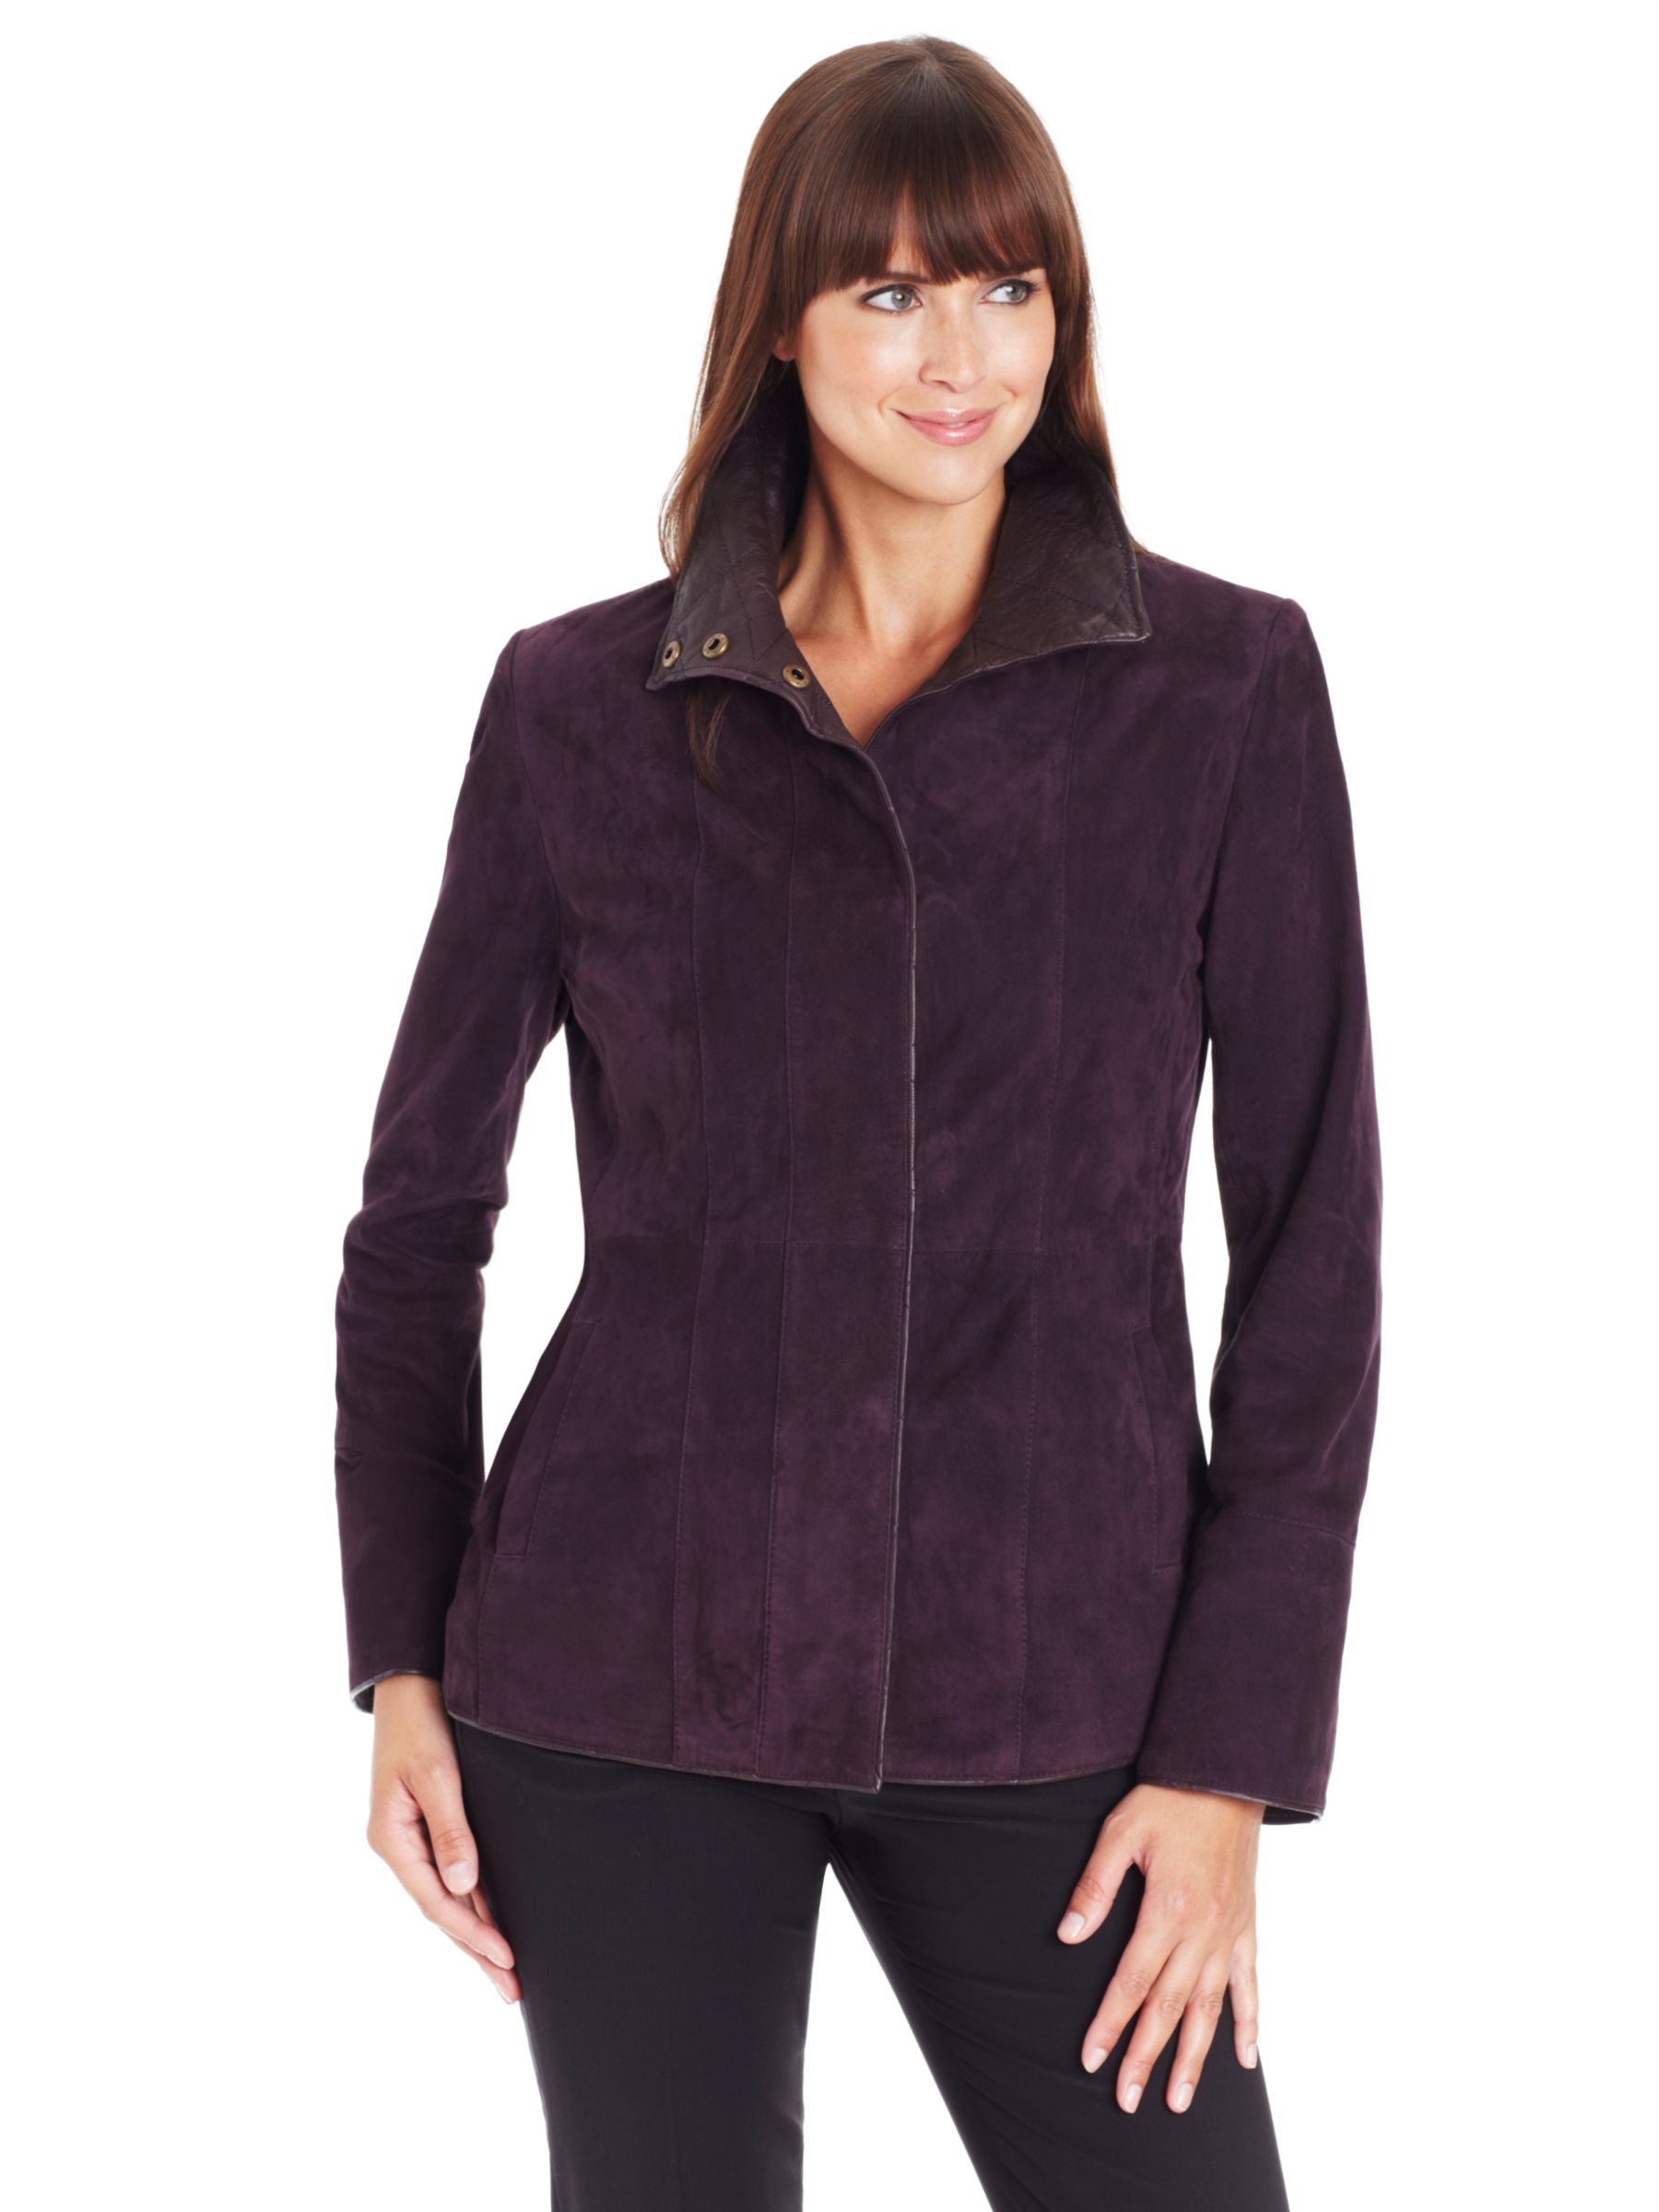 John Lewis Women Holly Suede Funnel Neck Jacket, Imperial Purple at JohnLewis